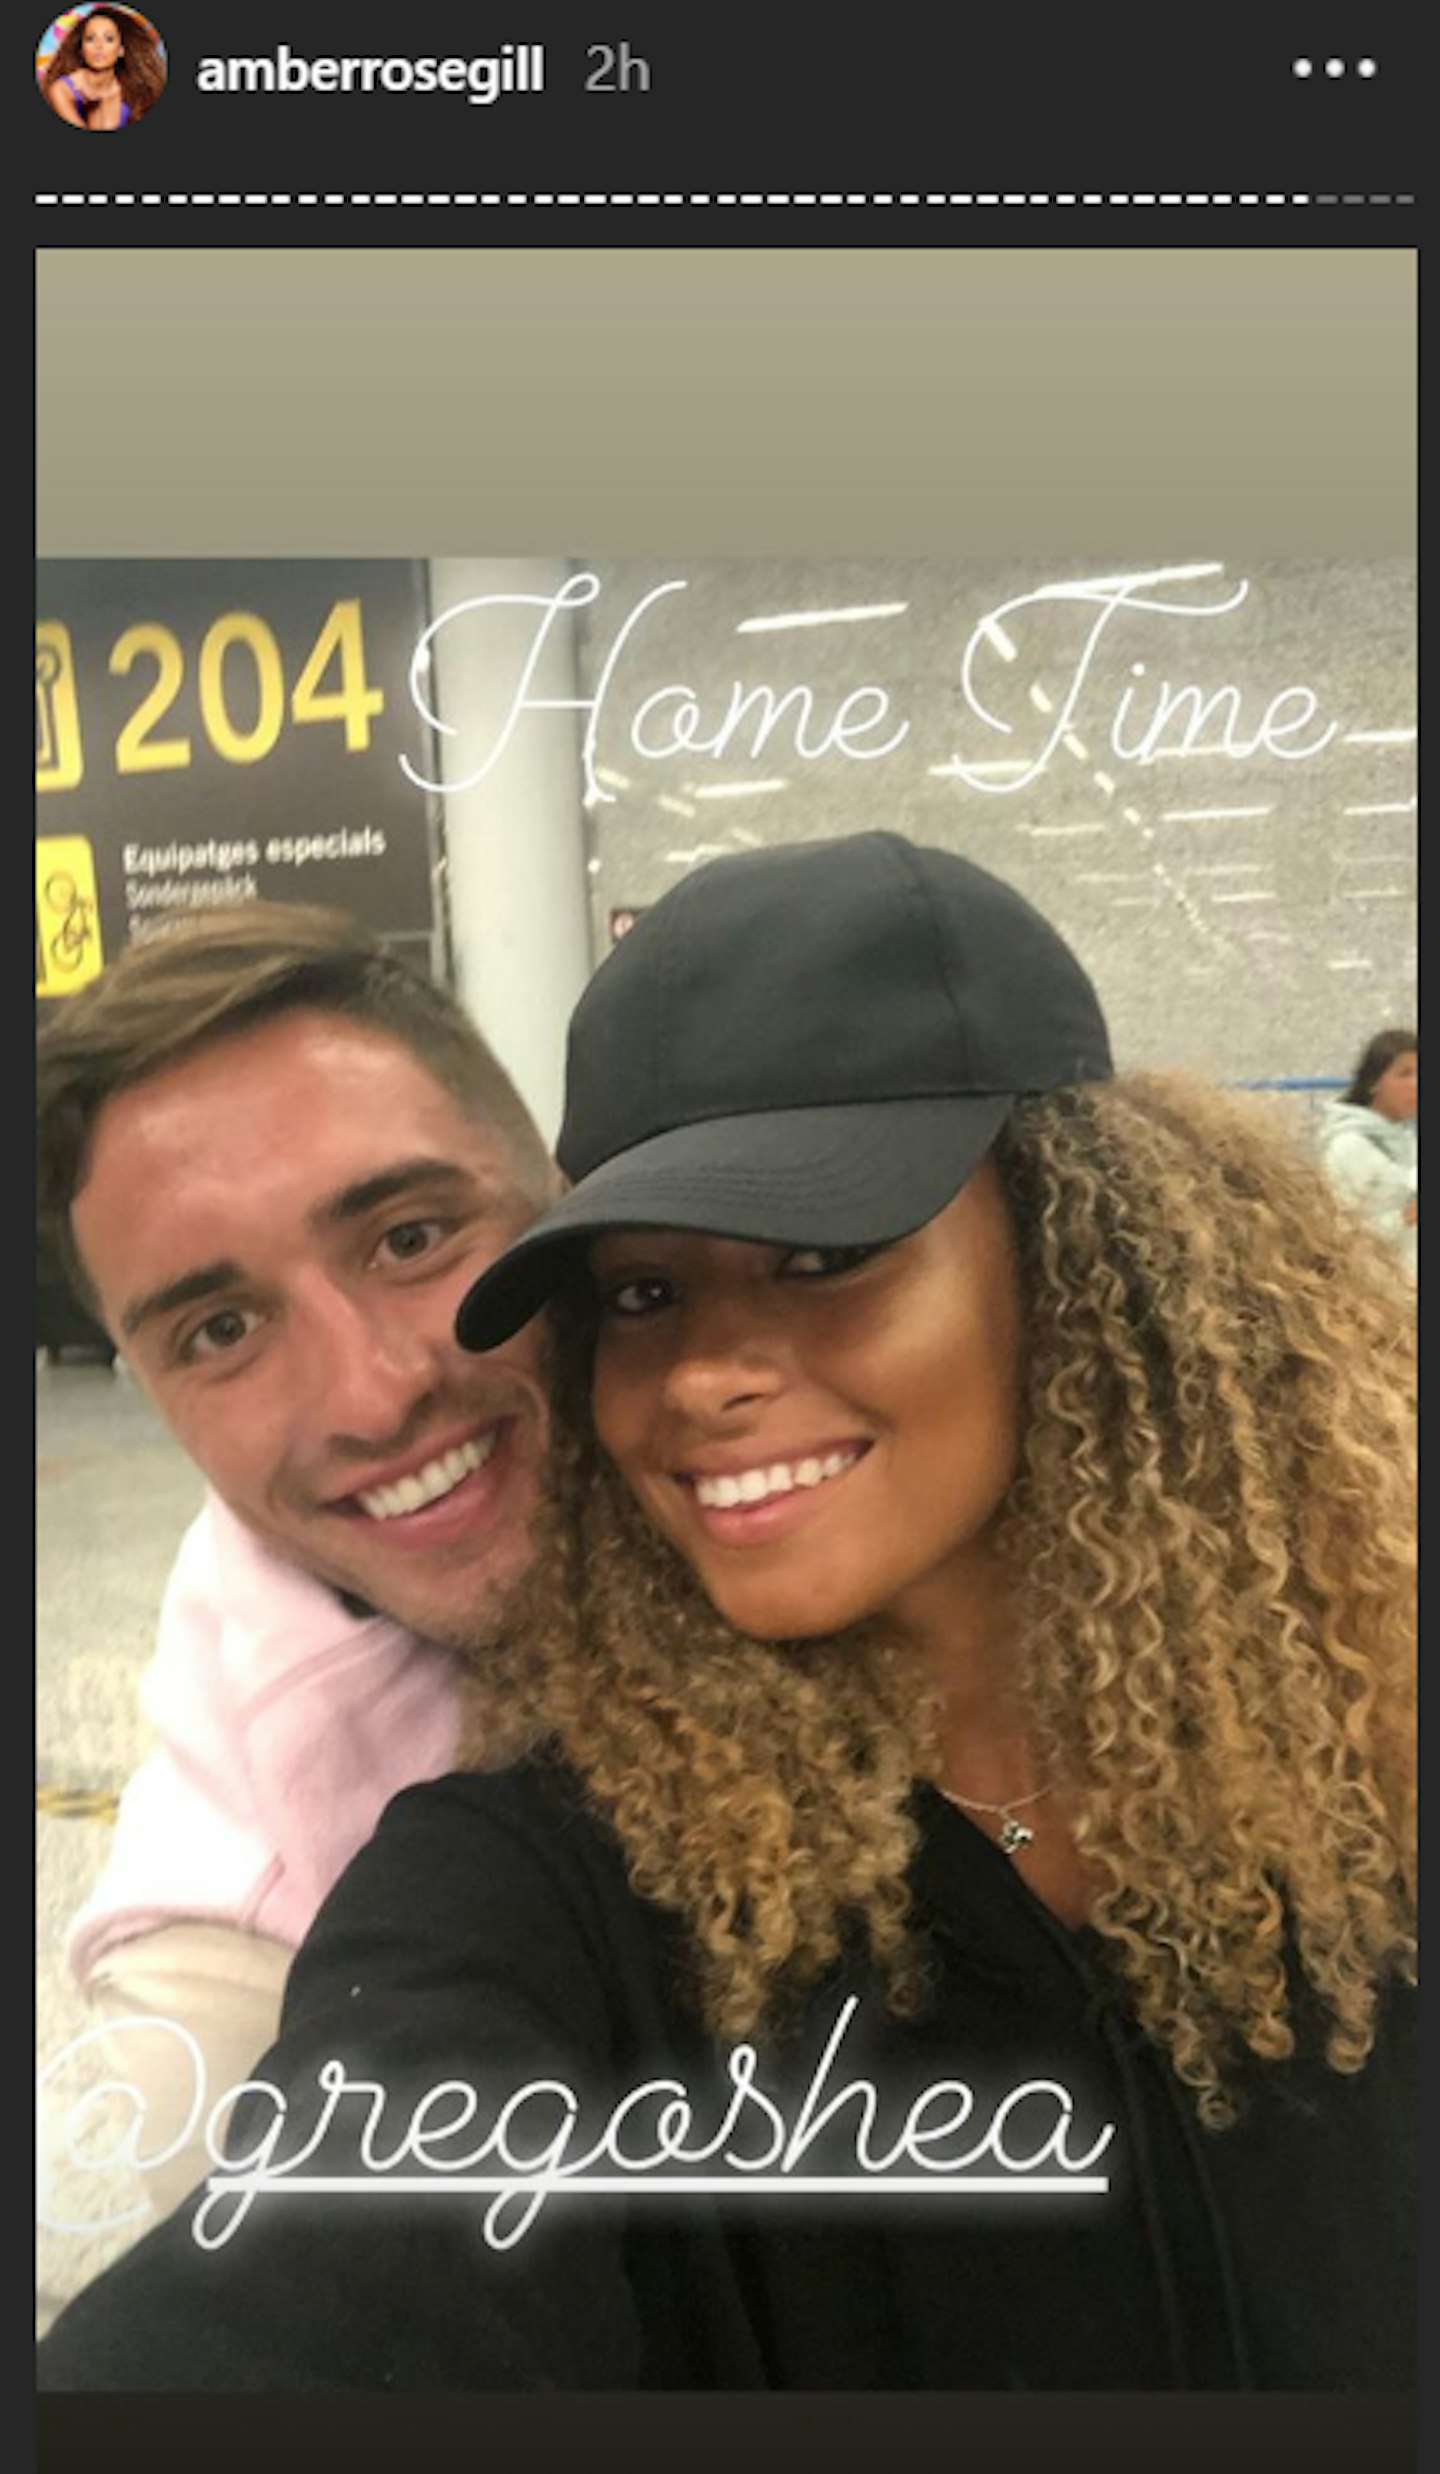 Amber and Greg made their way back to the UK